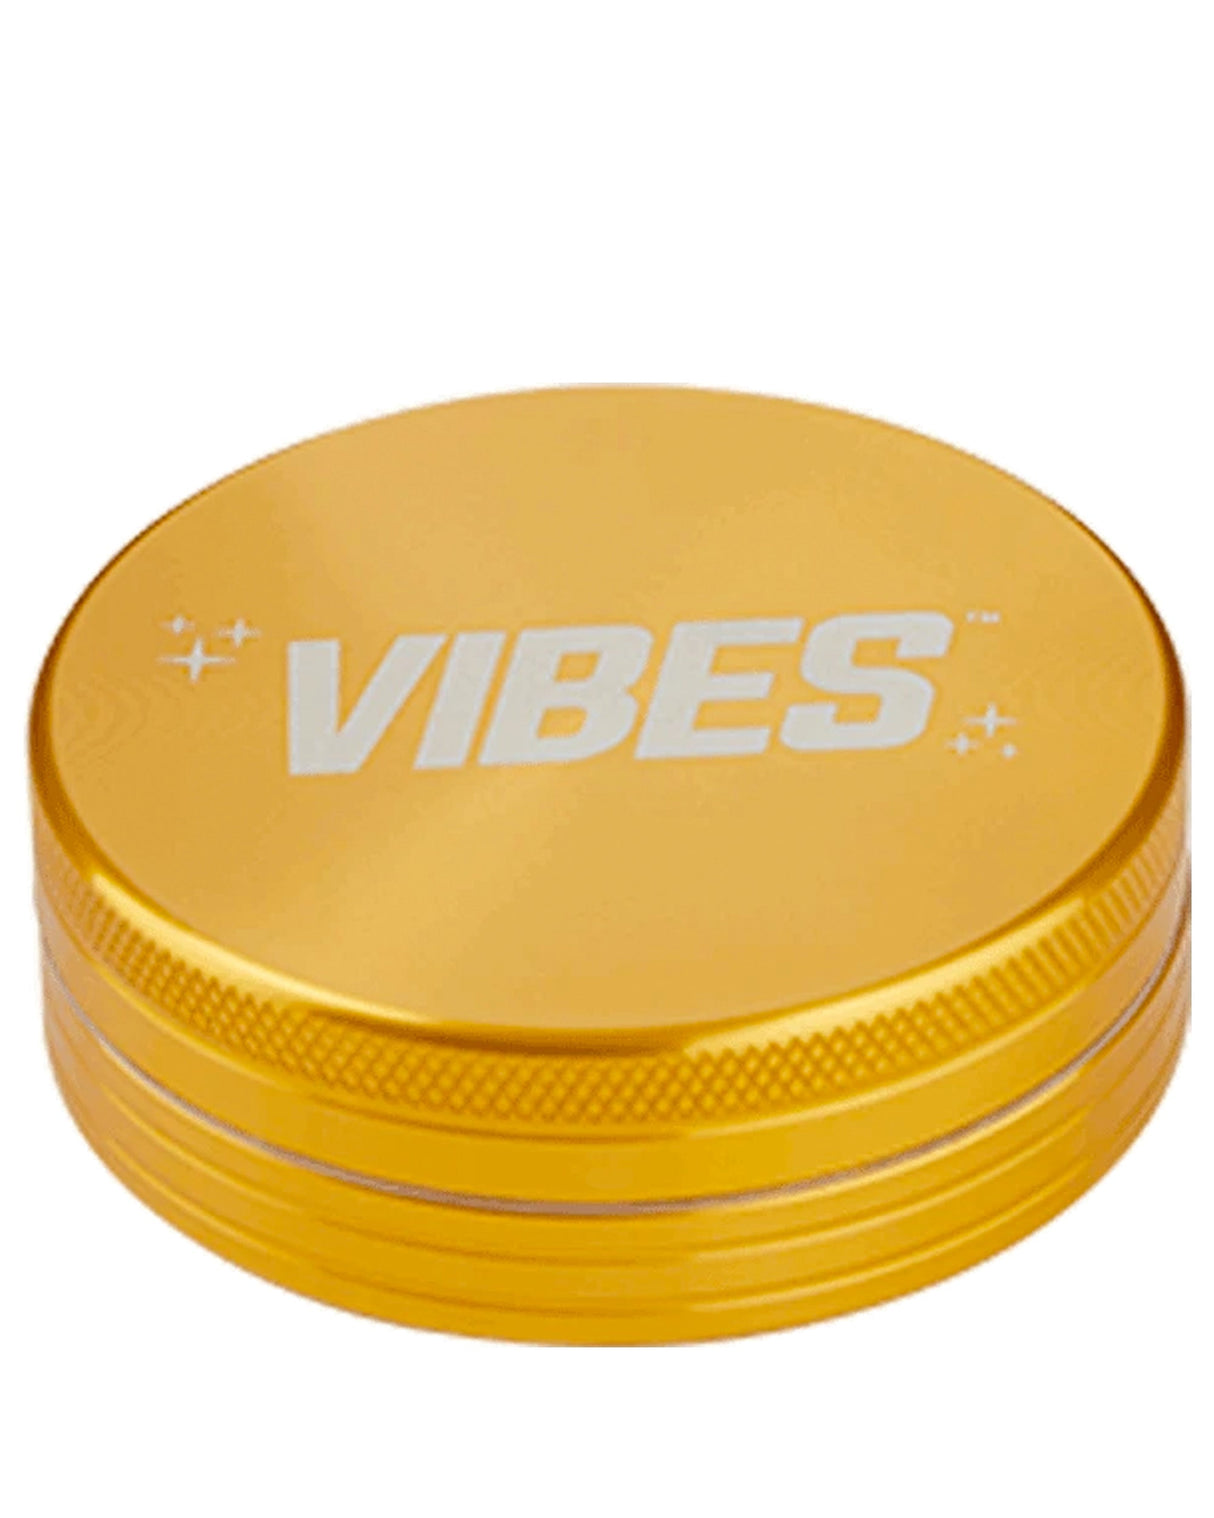 Vibes 2-Piece Aluminum Grinder in Gold - Compact and Portable Design